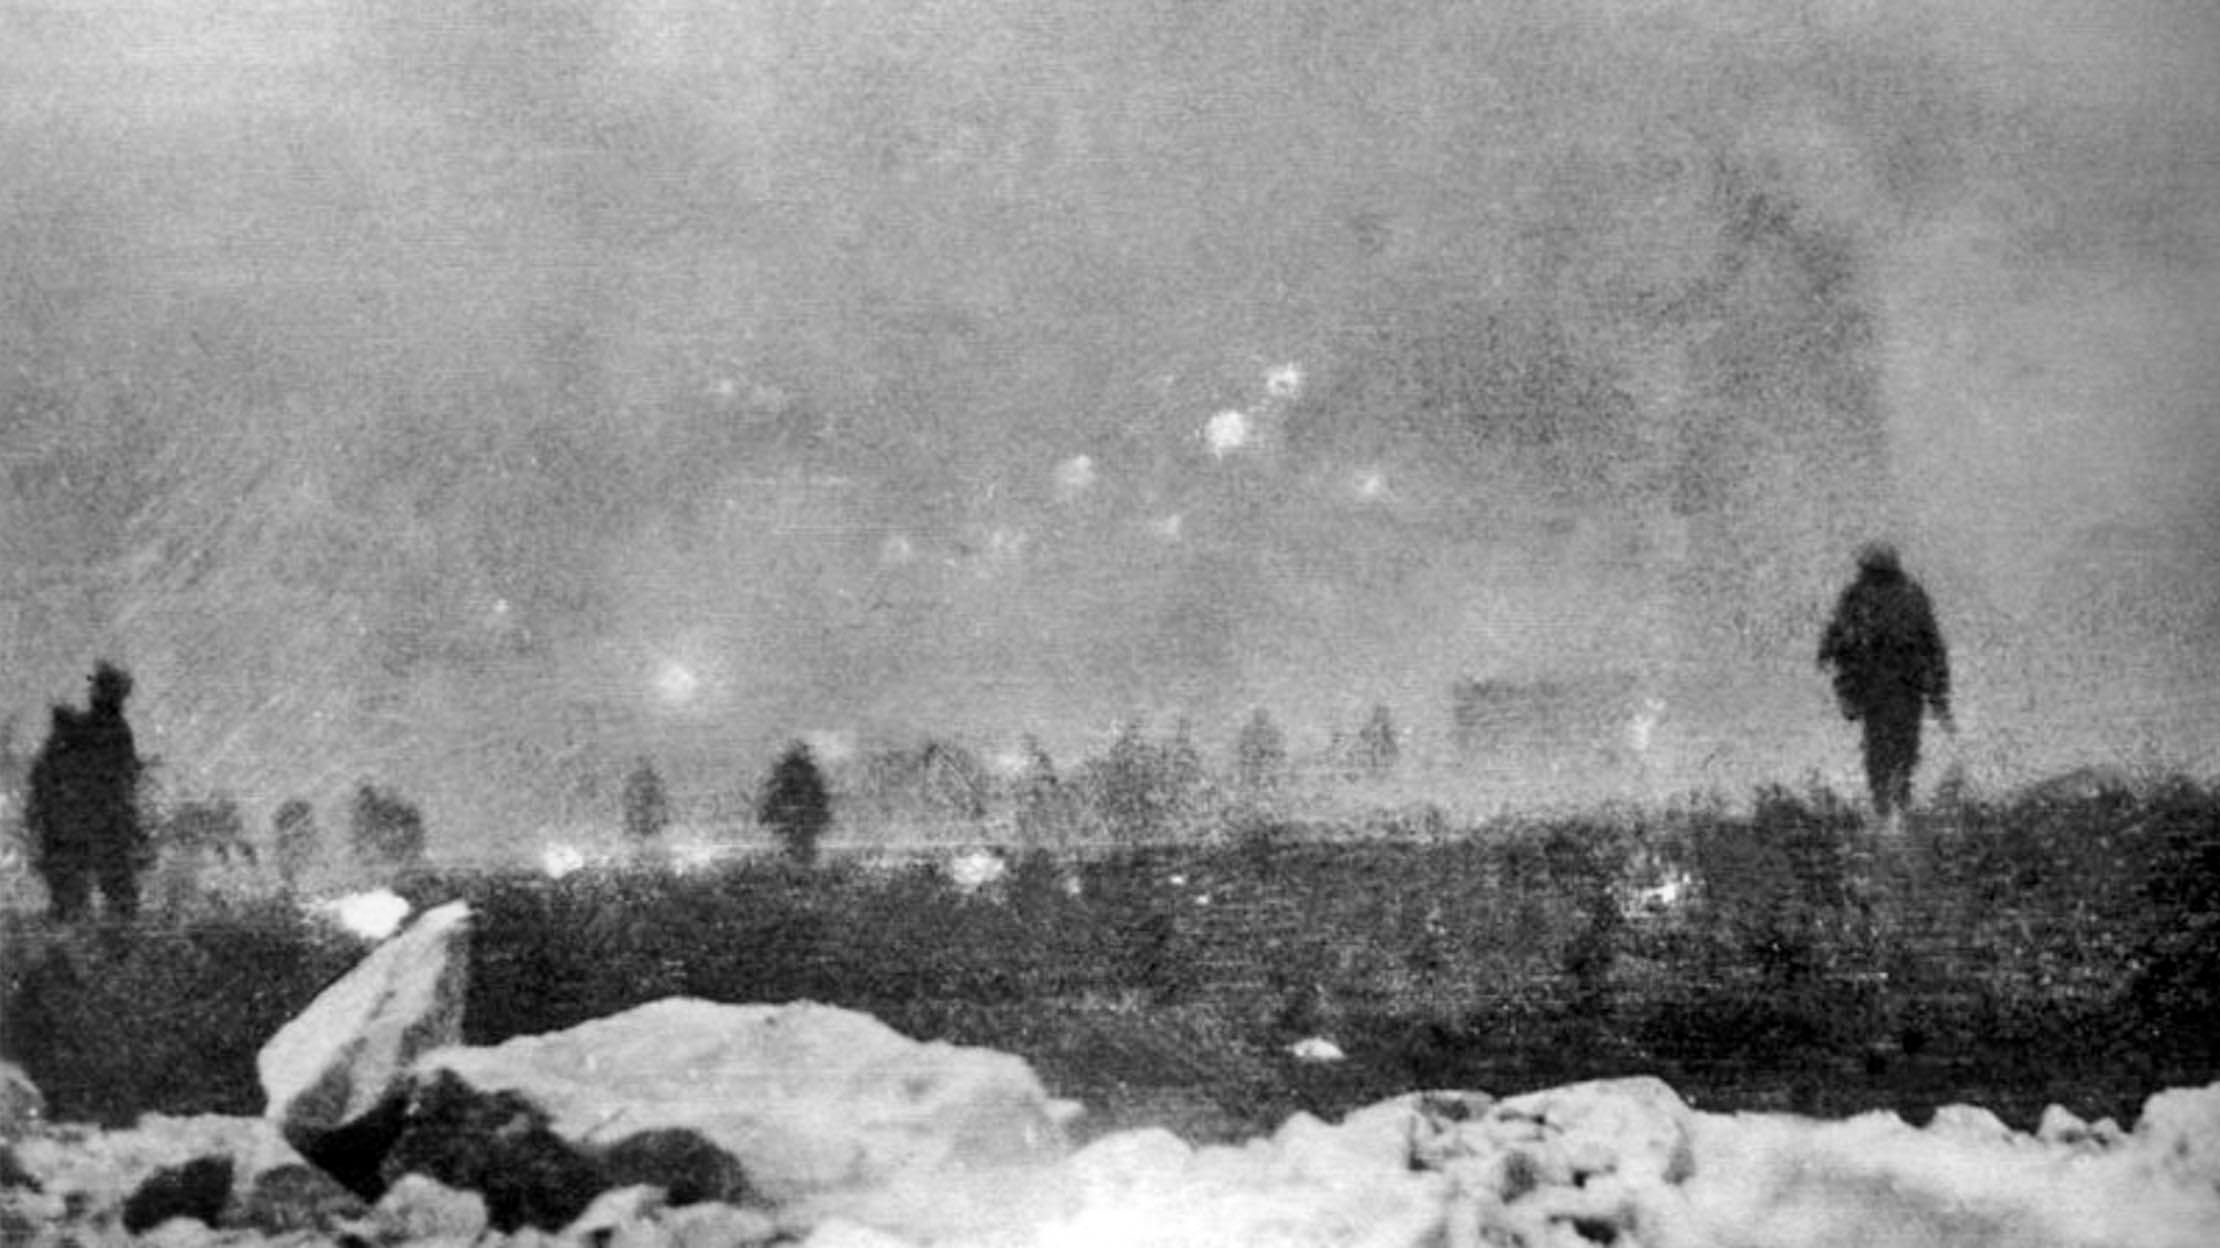 British troops advance to the attack through a cloud of poison gas as viewed from the trench which they have just left: a remarkable snapshot taken by a soldier of the London Rifle Brigade on the opening day of the Battle of Loos.